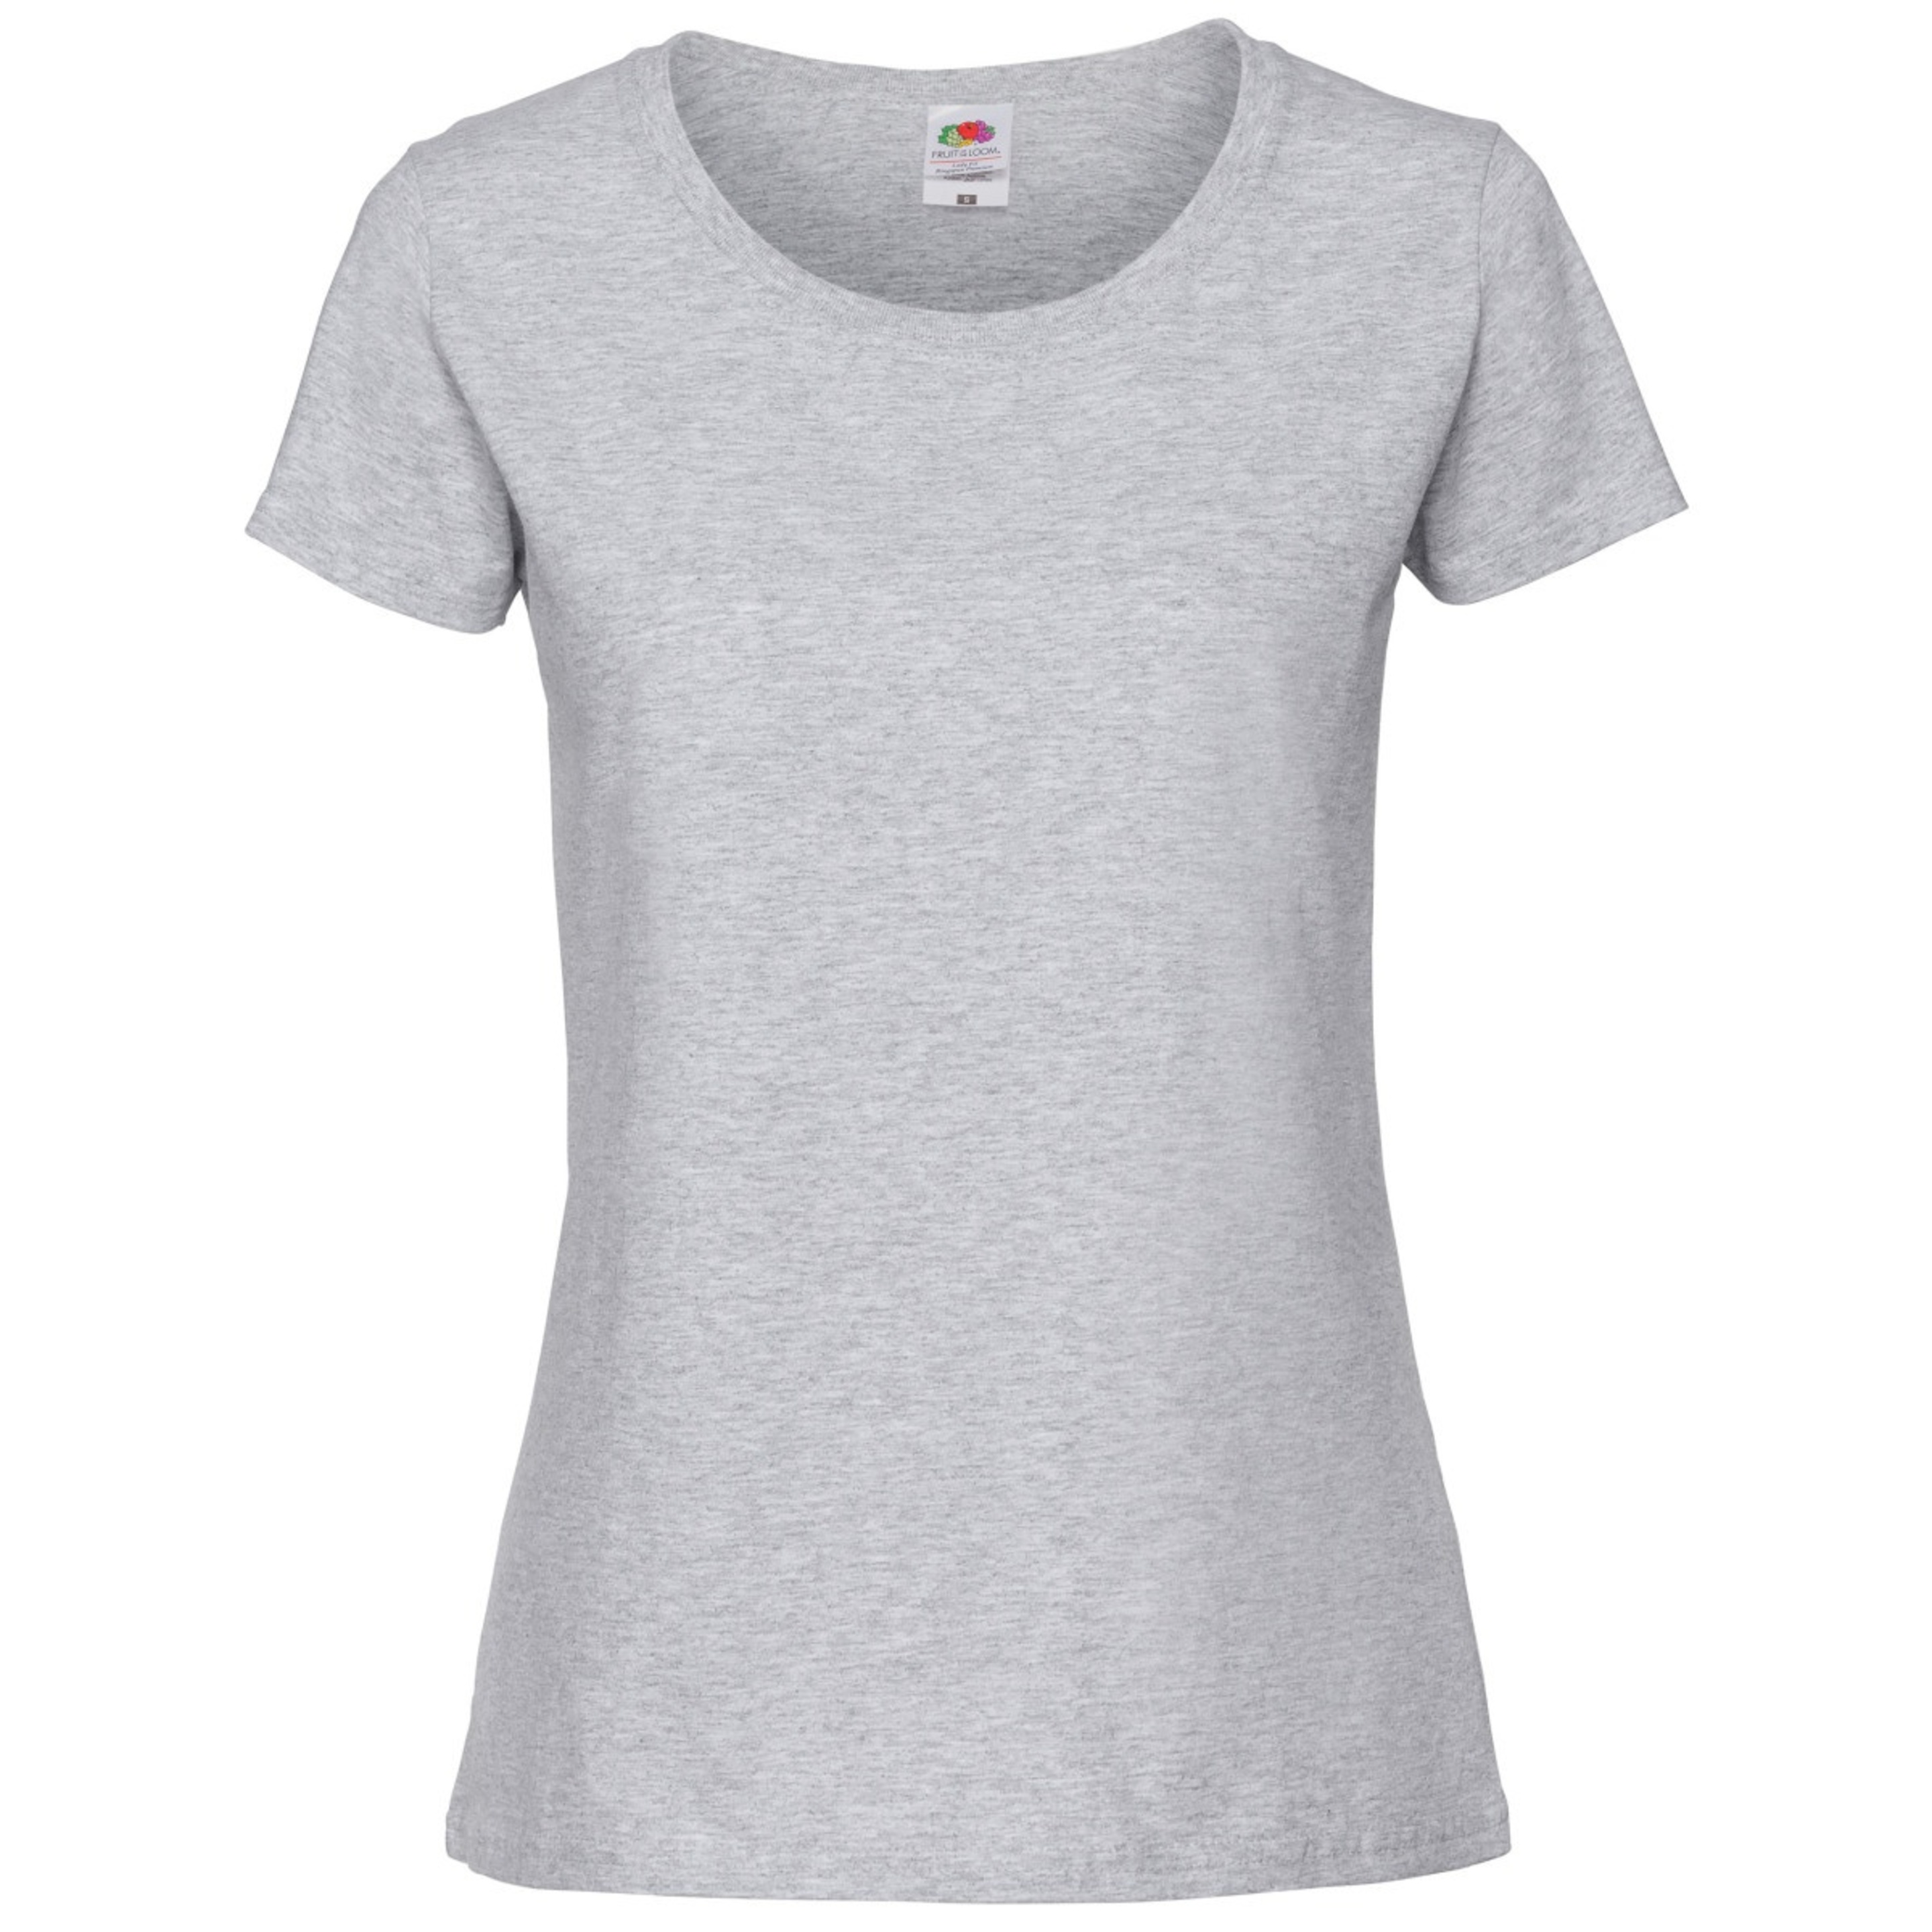 T-shirt Fruit Of The Loom - gris - 